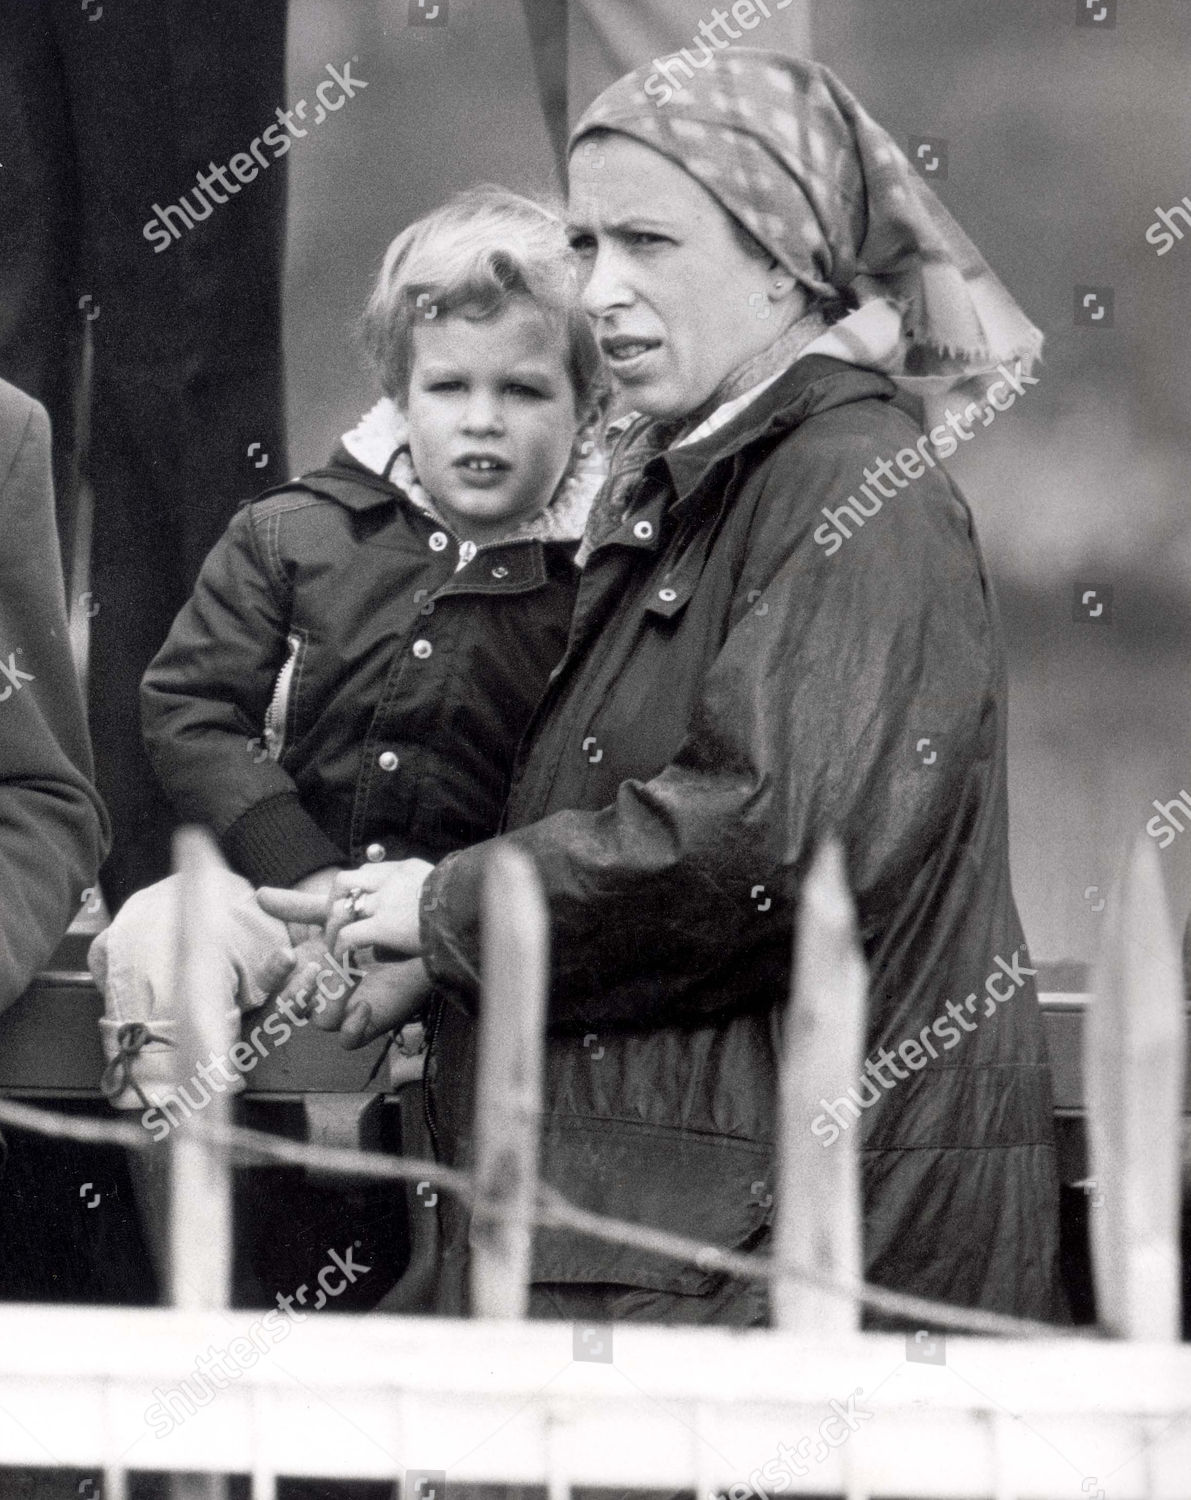 princess-royal-april-1981-princess-anne-and-son-peter-phillips-at-the-badminton-horse-trials-shutterstock-editorial-1124211a.jpg